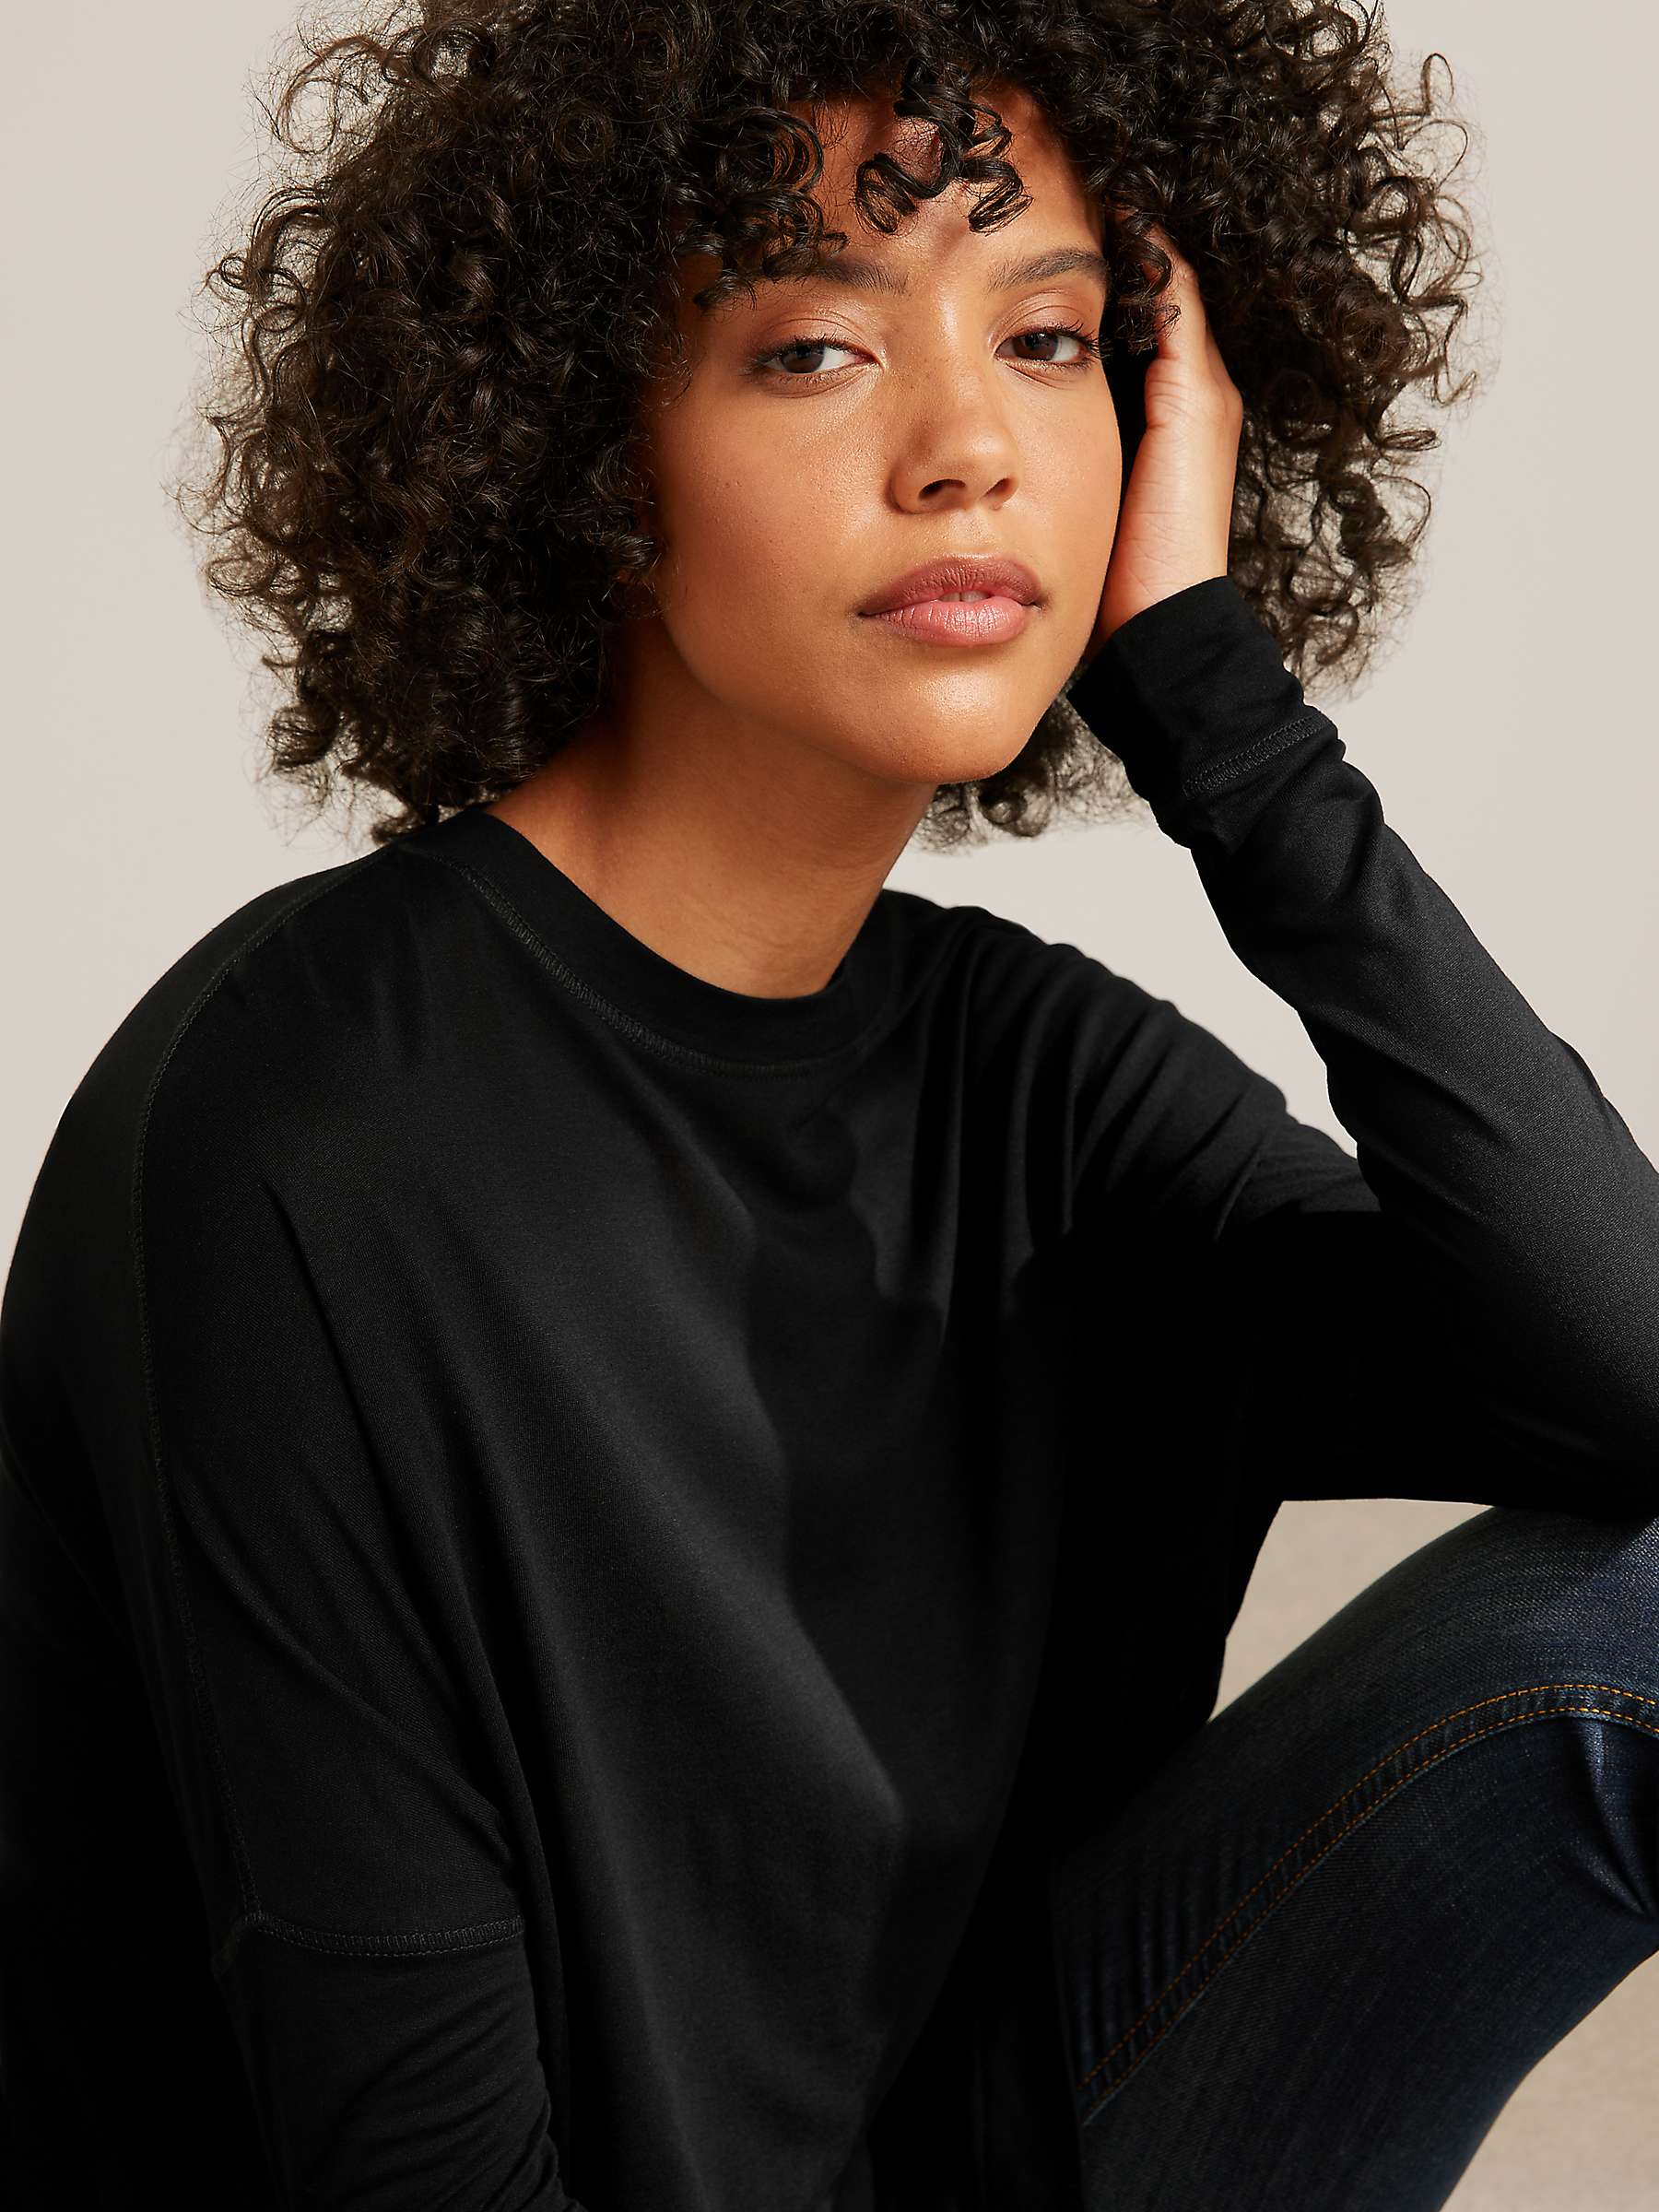 AND/OR Orla Long Sleeve Jersey Top, Black at John Lewis & Partners